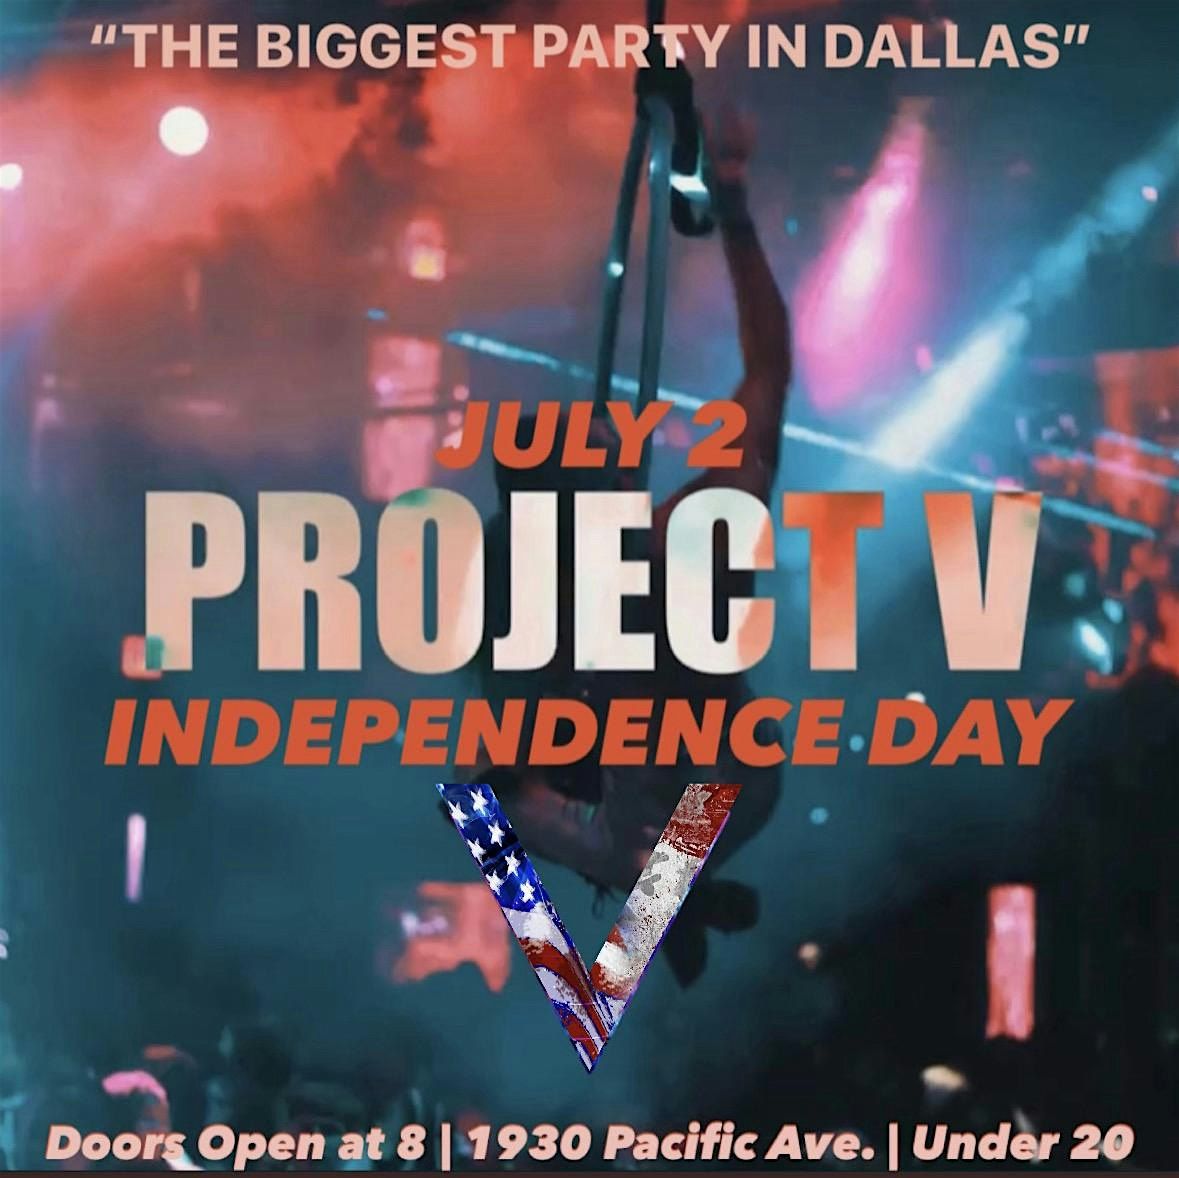 PROJECT V: Independence Day